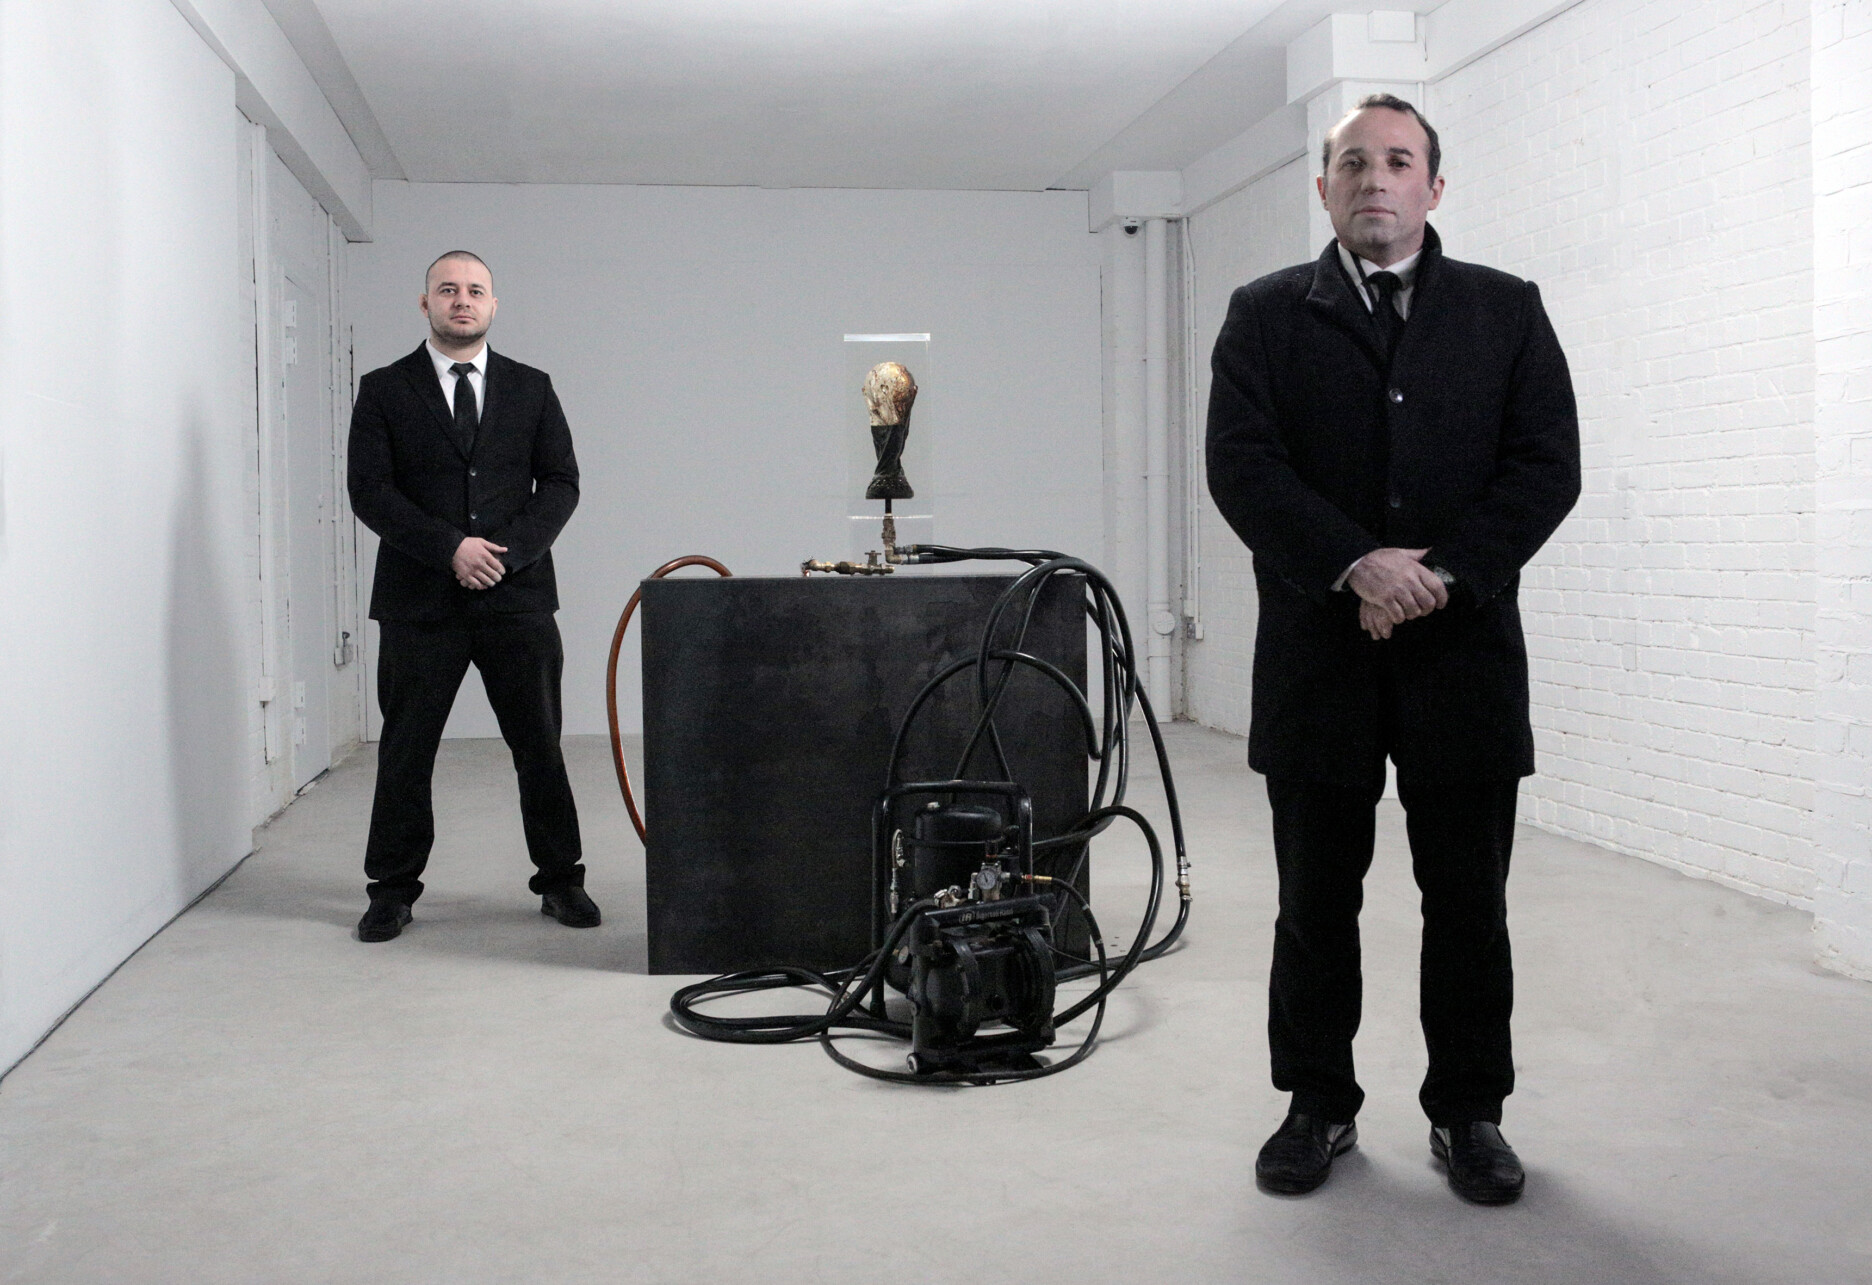 This image depicts Andrei Molodkin's sculpture The Fifa World Cup Filled With Qatari Oil being guarded by two stern security guards. The artwork is an acrylic block with a mould of the Fifa World Cup, this block is connected to a sea of pipes that trail from a central black podium onto the floor.